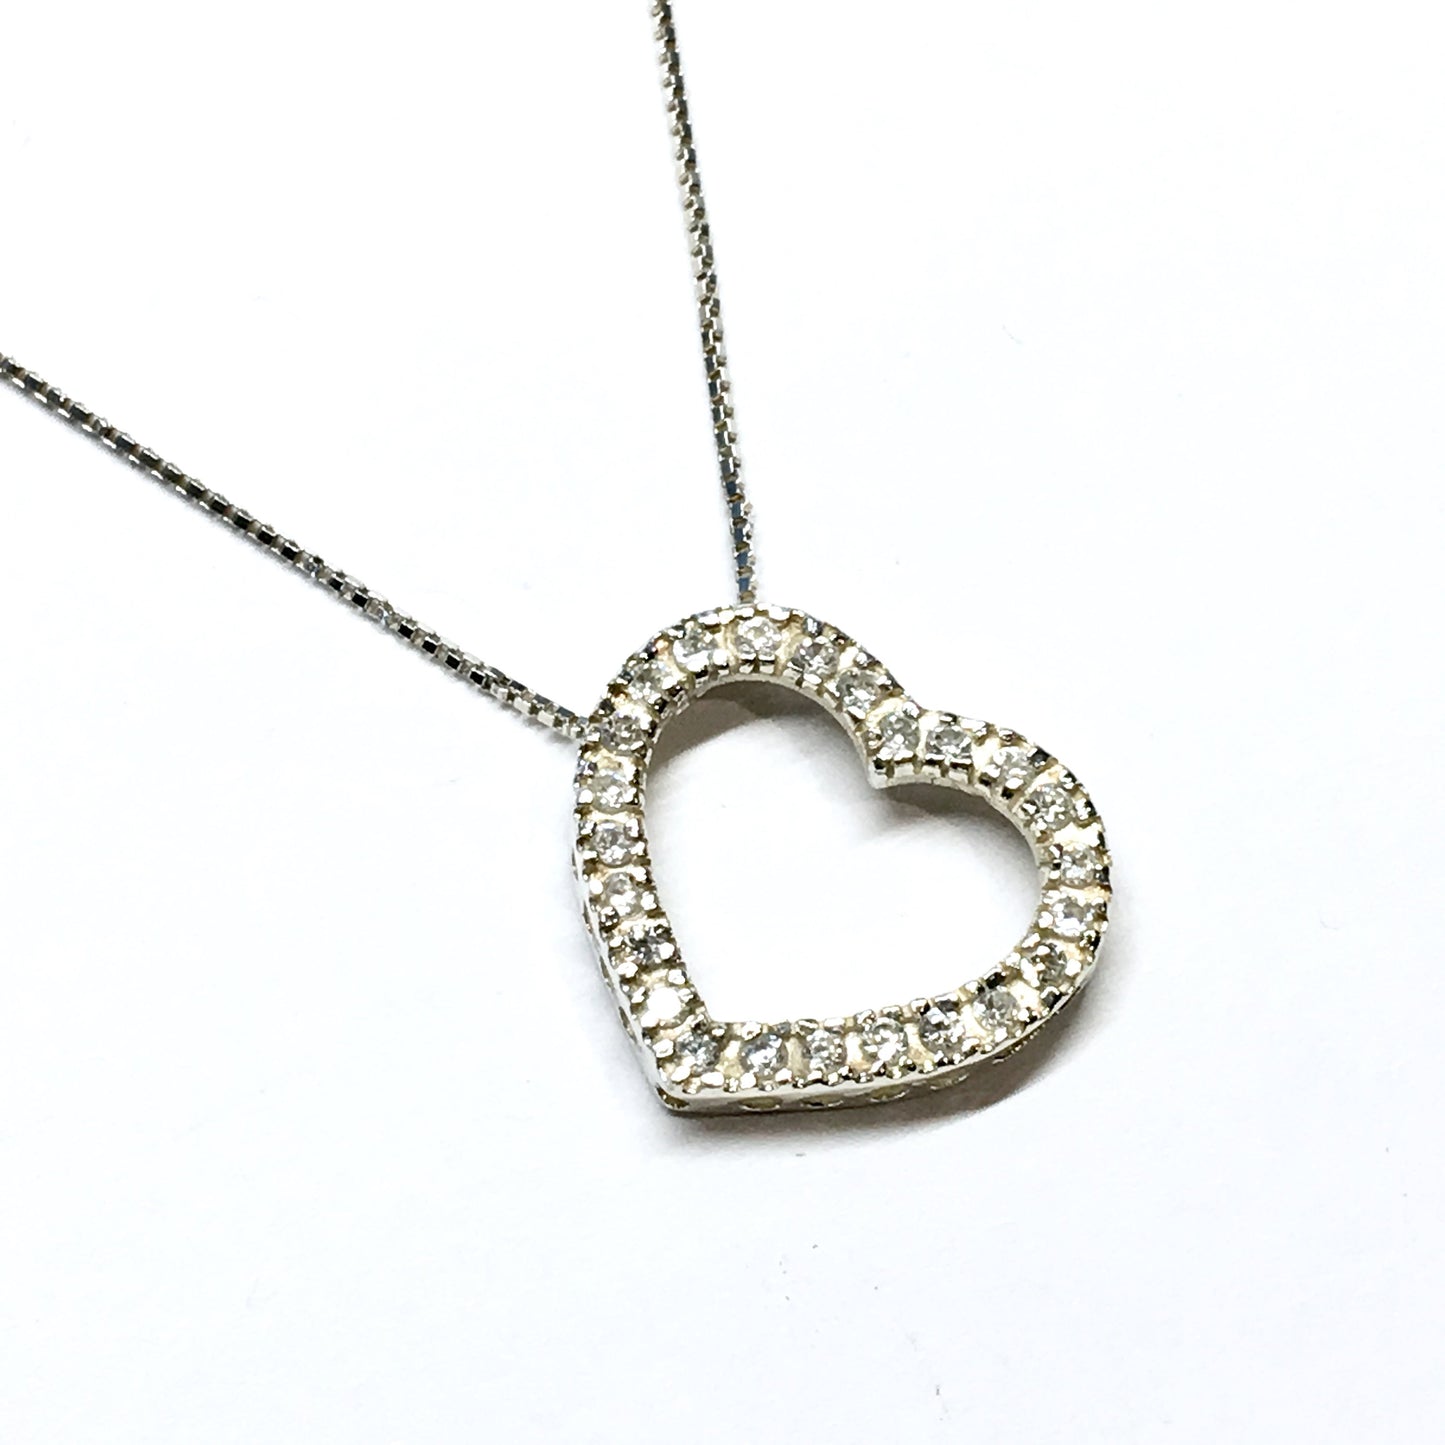 Necklace - Womens 925 Sterling Silver Shining Love Statement Heart Pendant Necklace